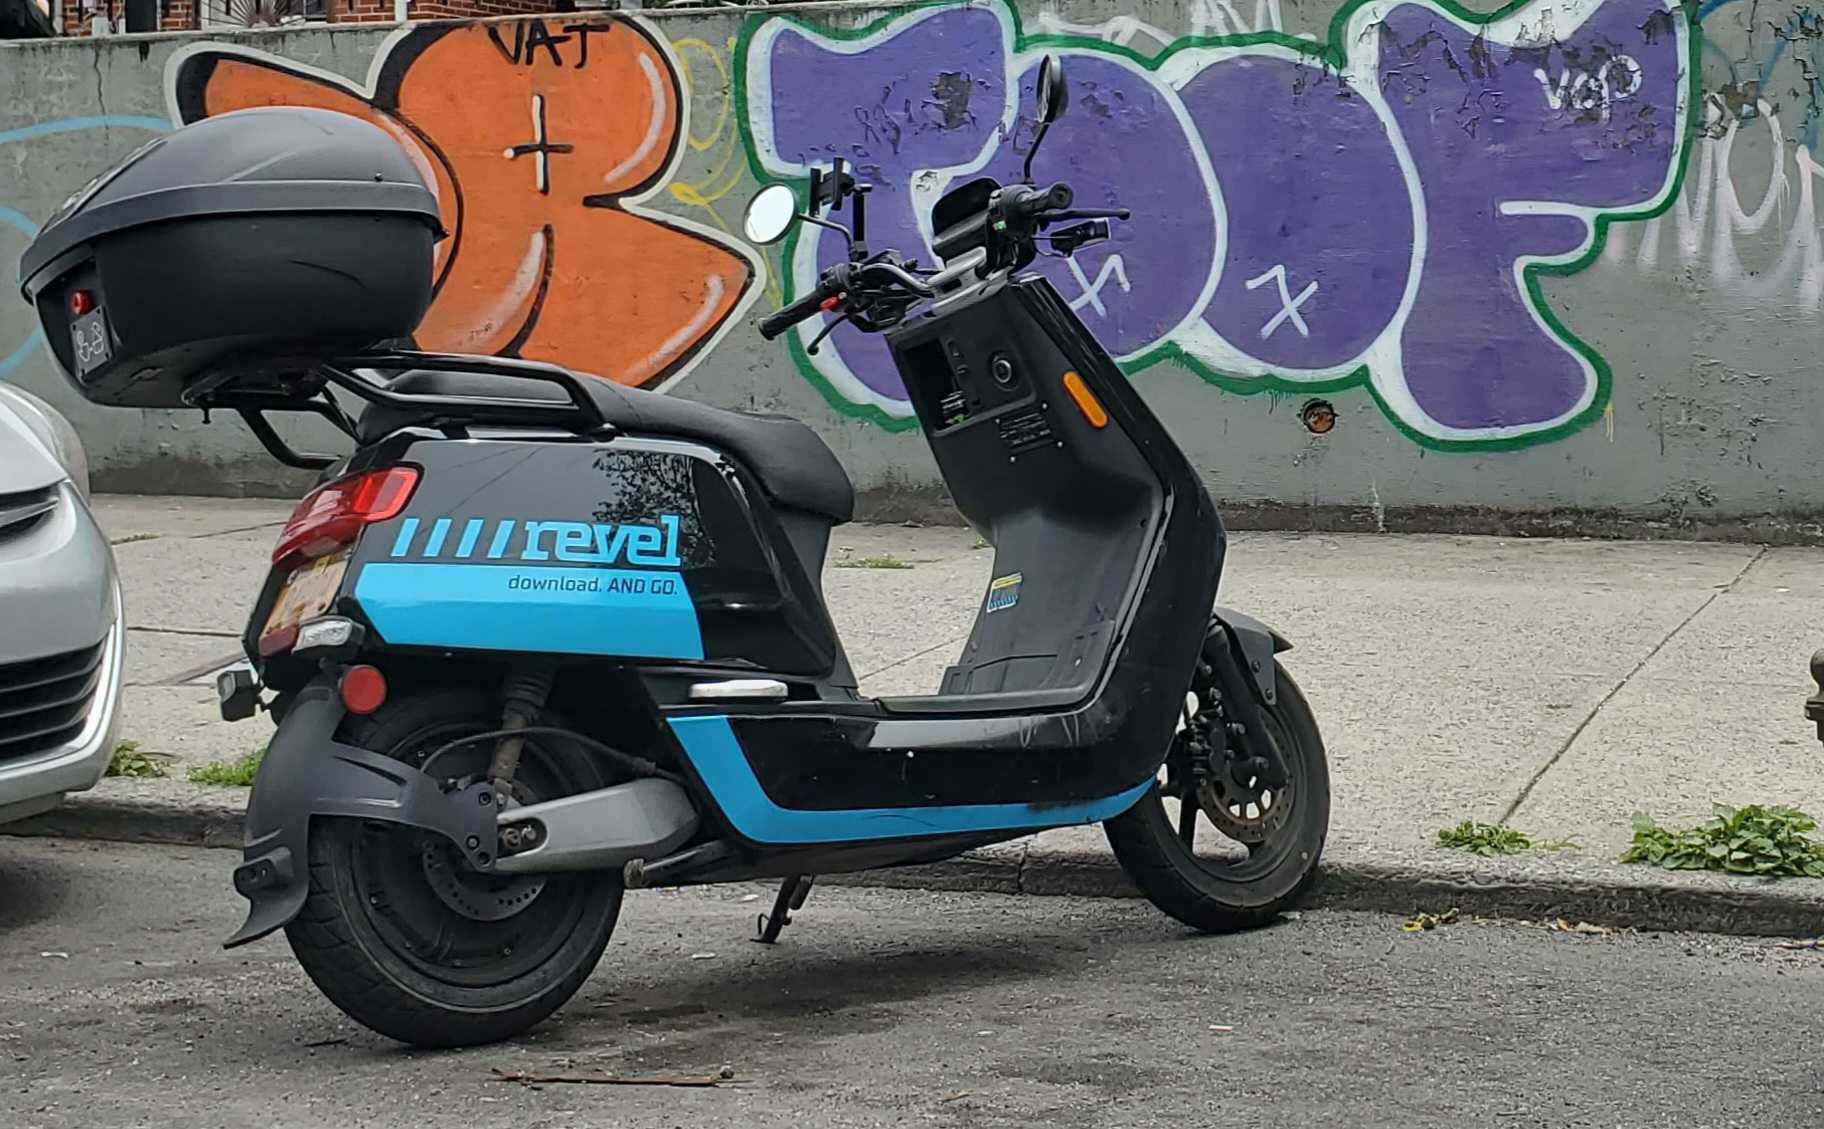 Brooklyn-based Revel to shut down its moped business - Gothamist